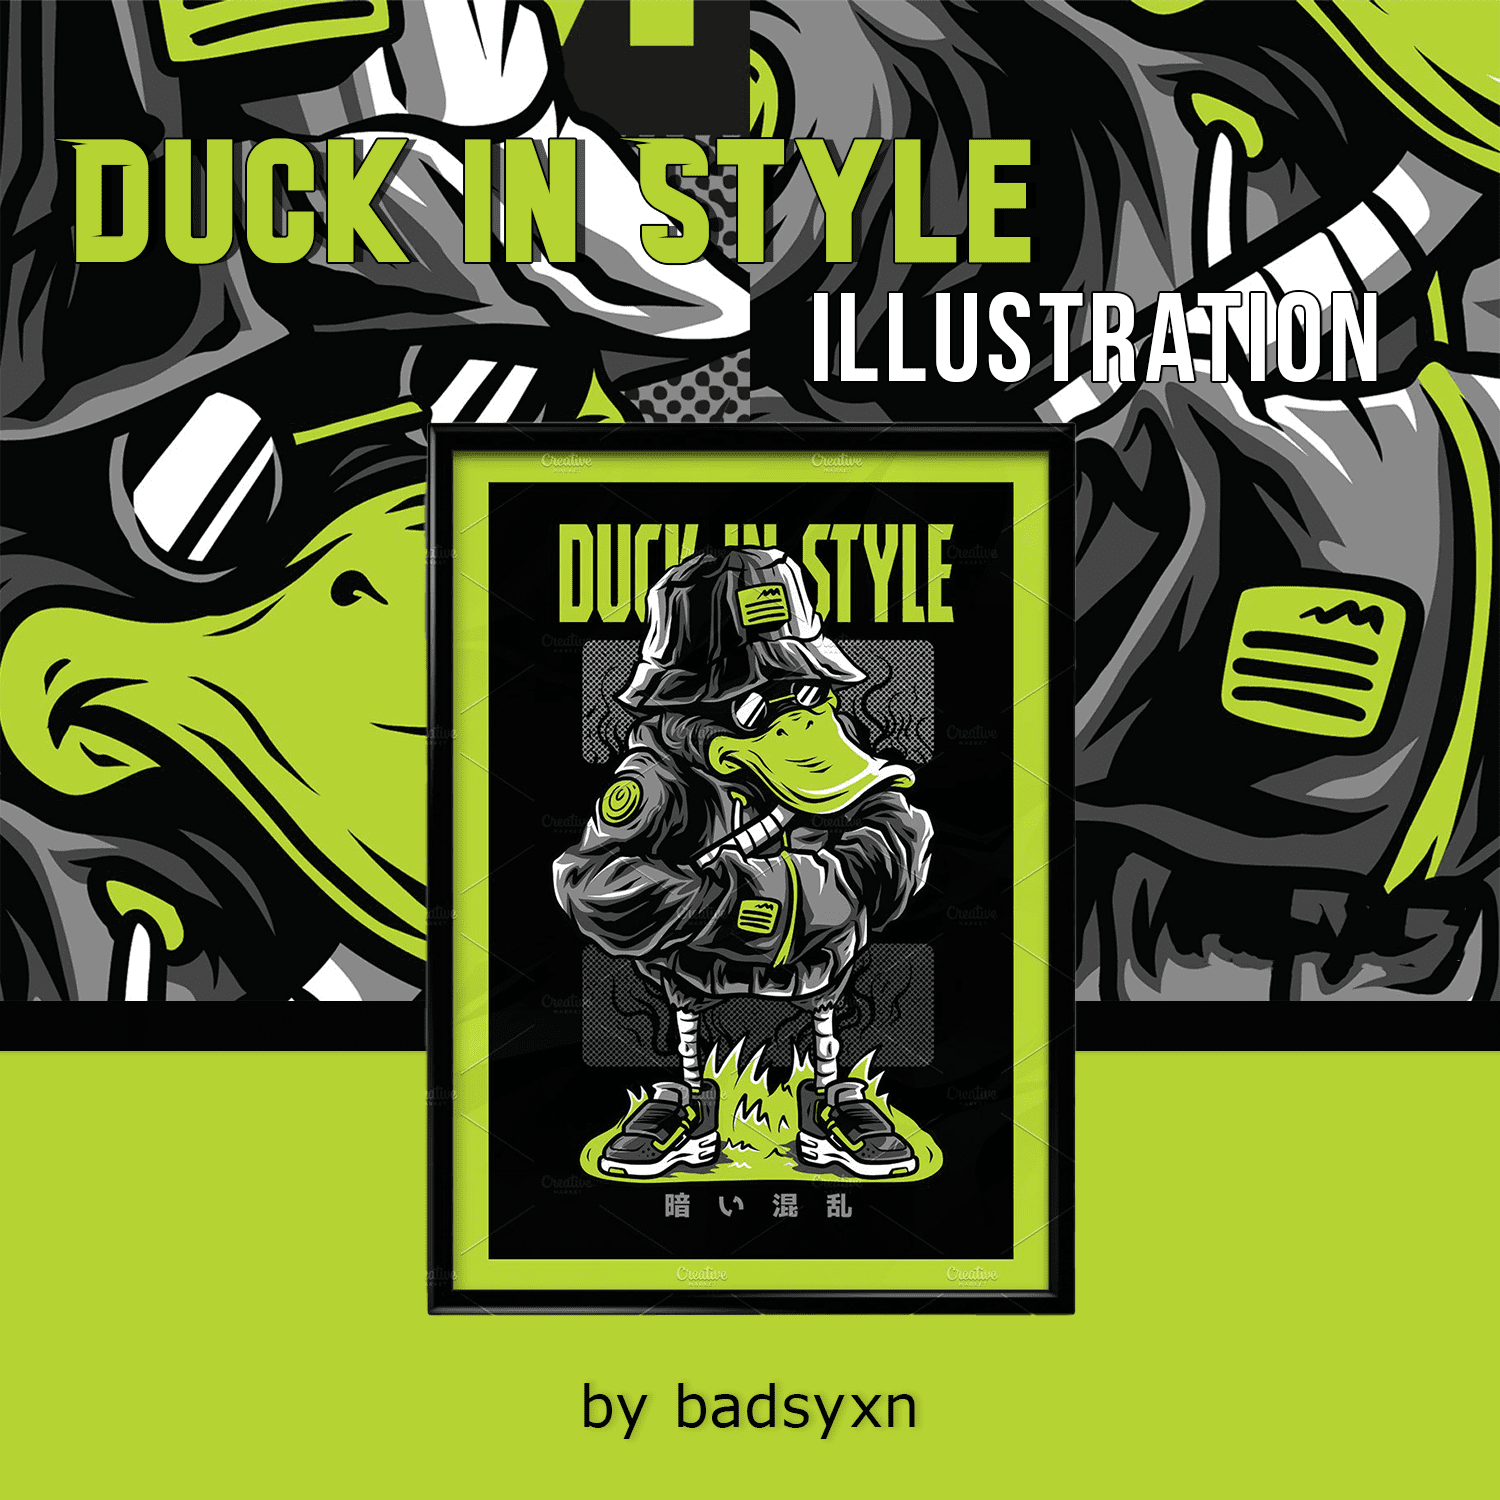 duck in style illustration.